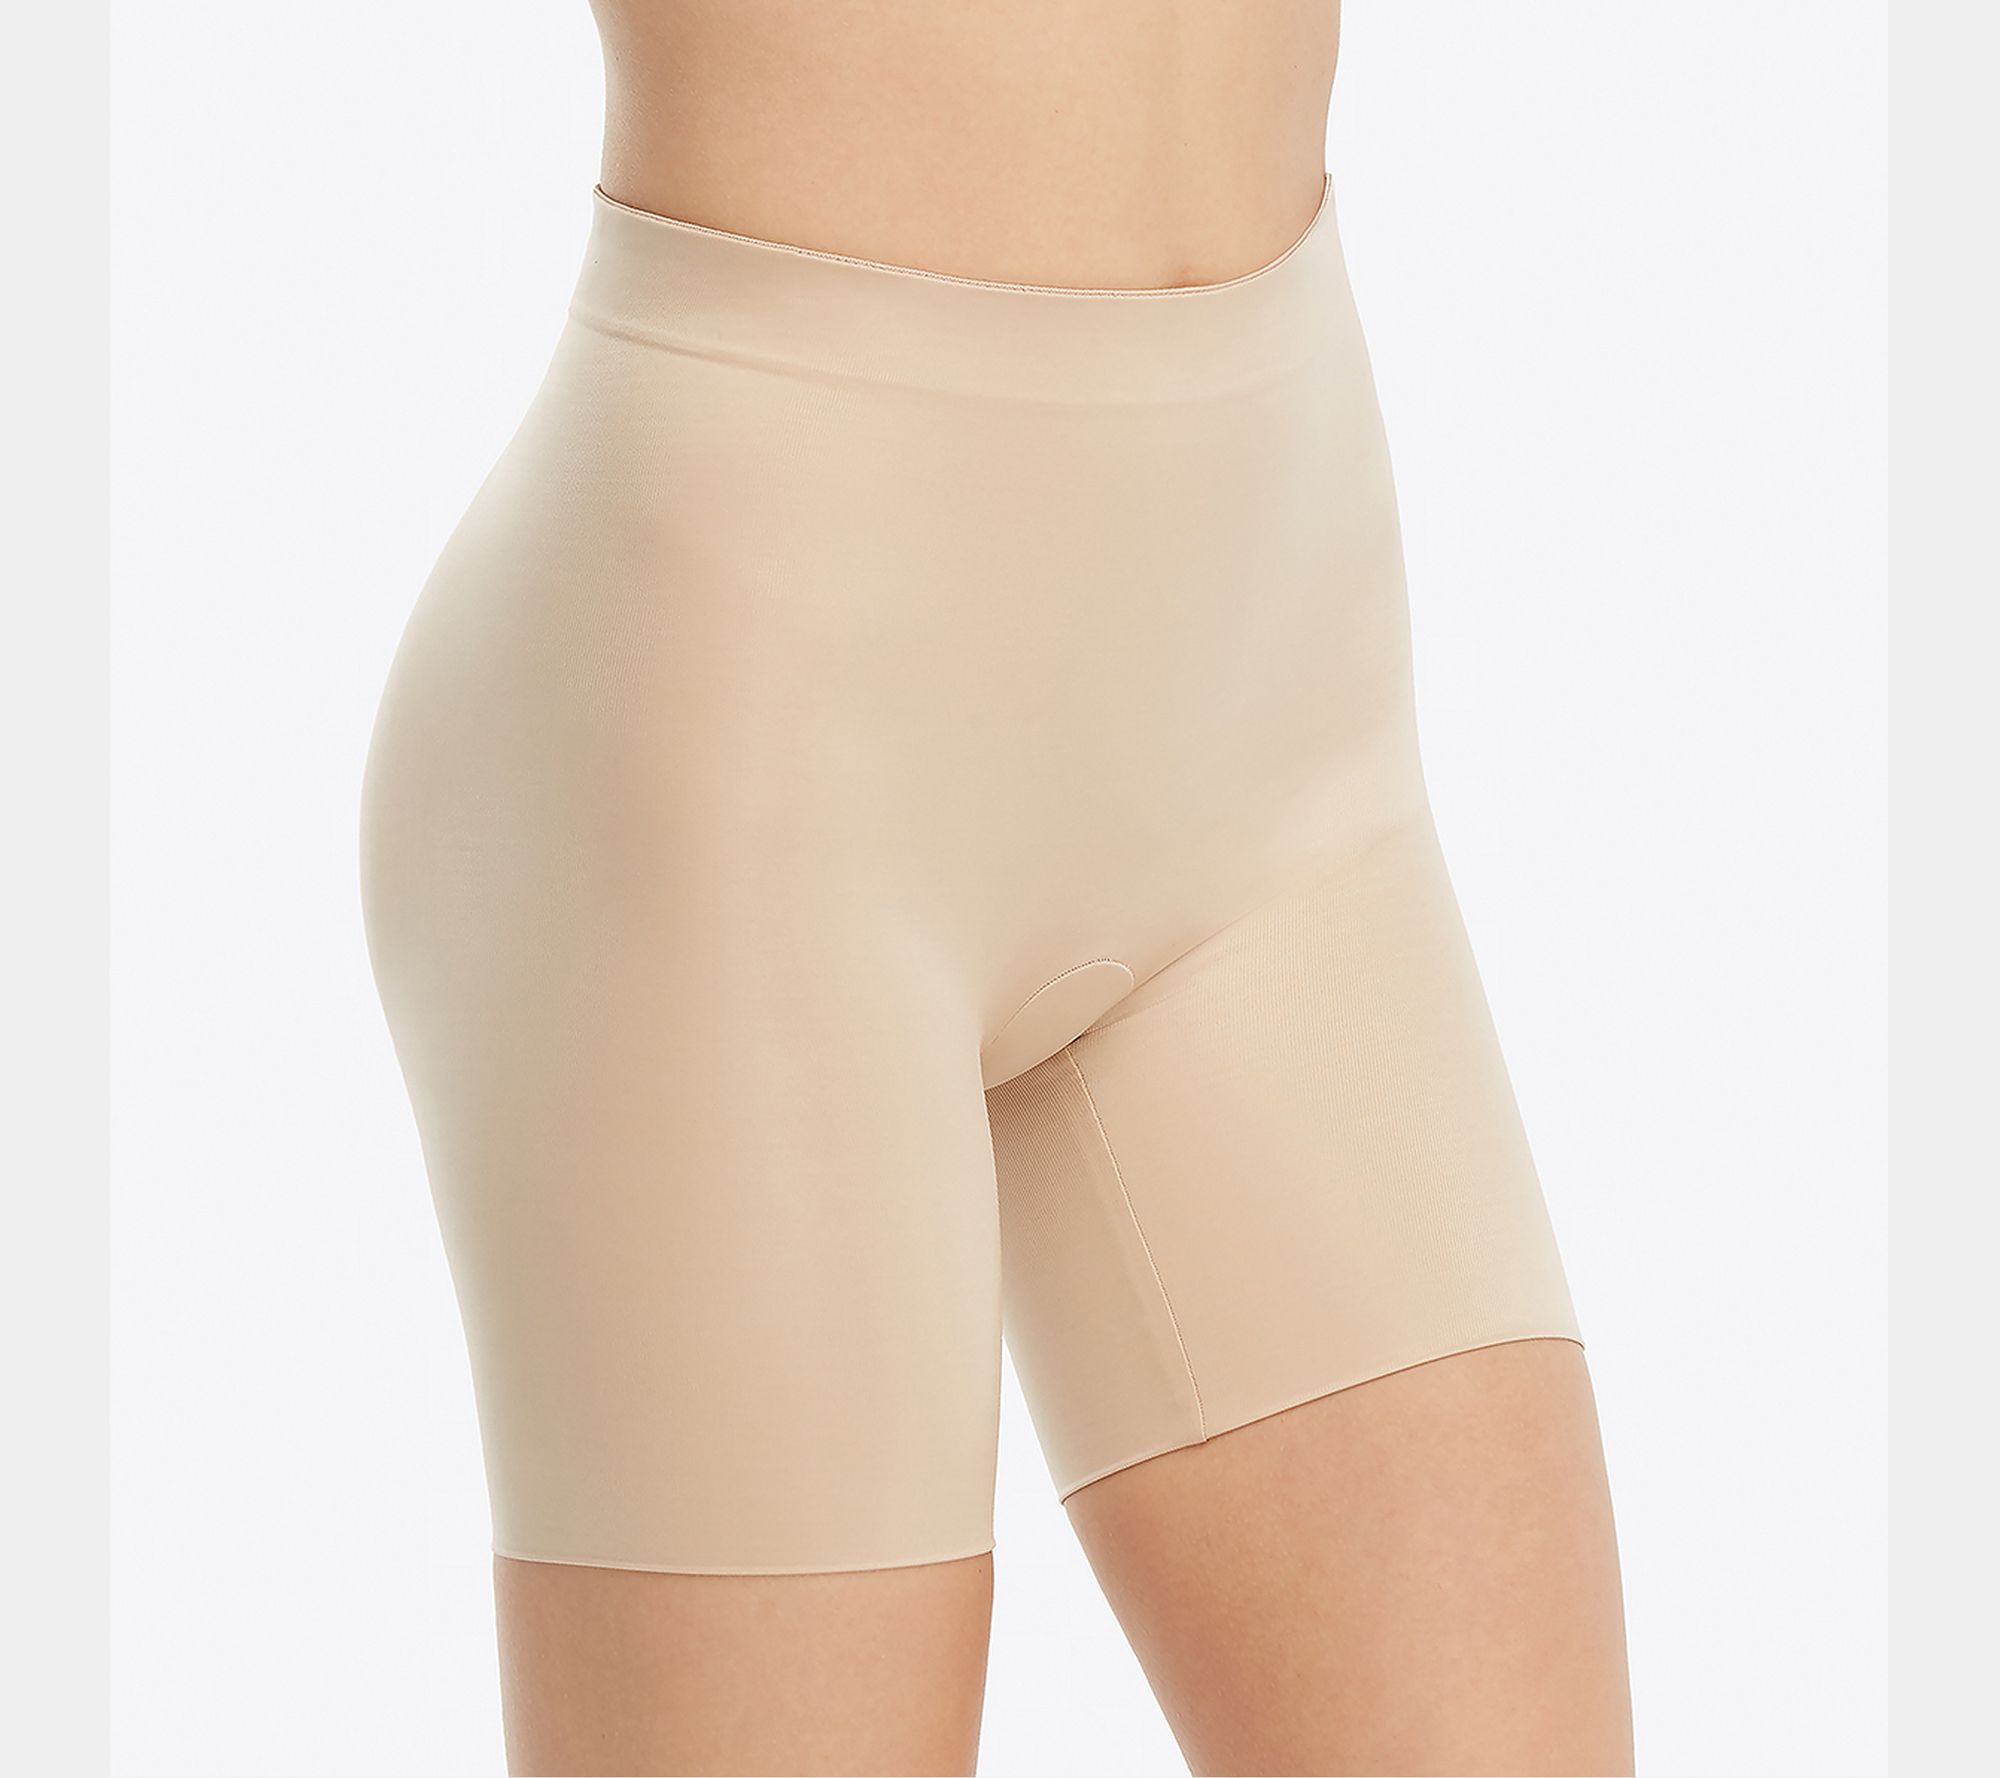 Spanx Higher Power & Power Shaping Short Set of 2 on QVC 